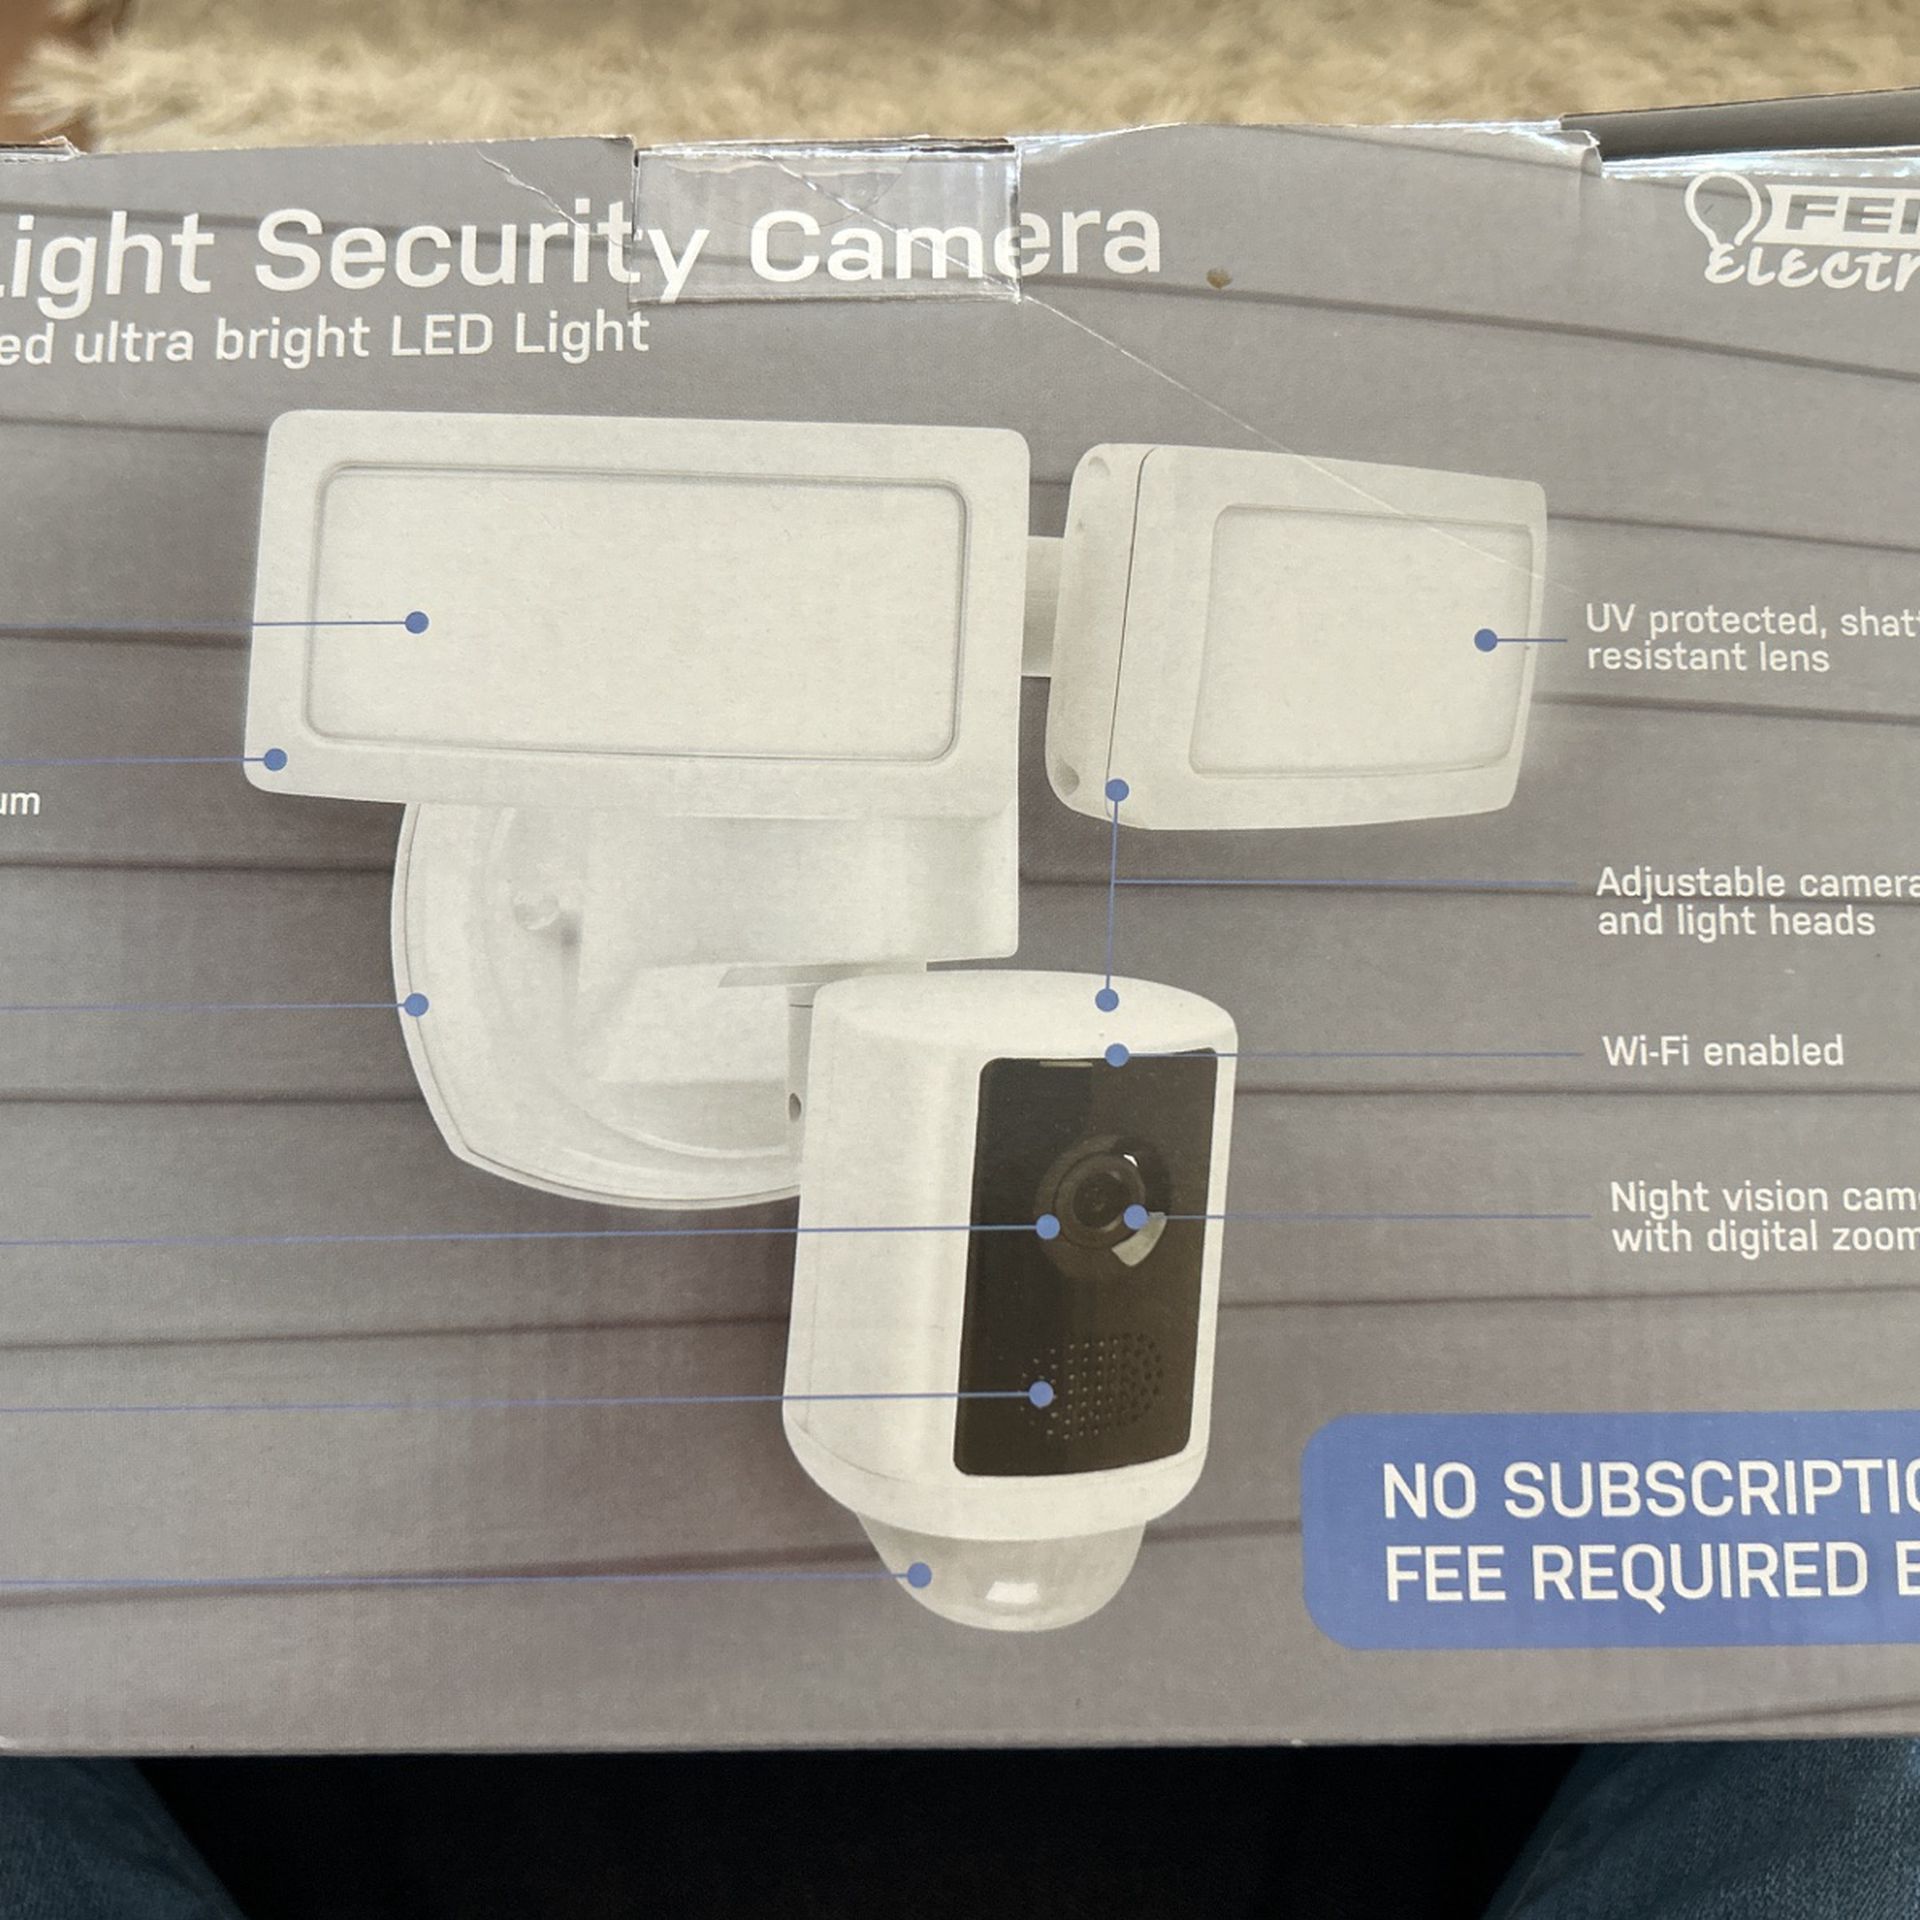 Flood Light Security Camera (selling 3, $85 Each)